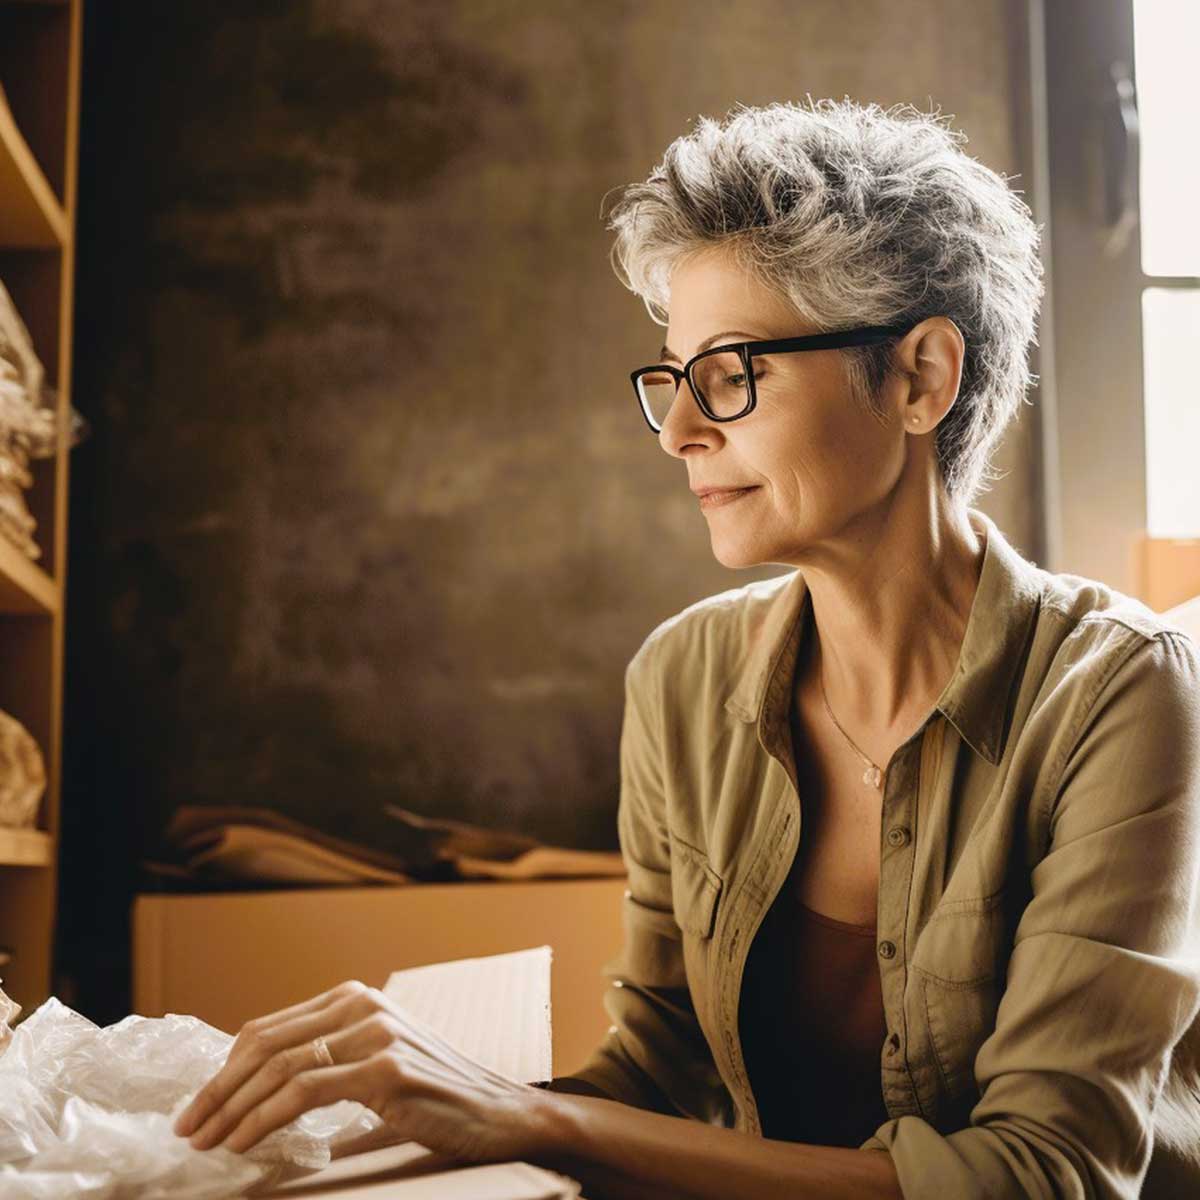 Midlife woman working through the process of downsizing without moving.